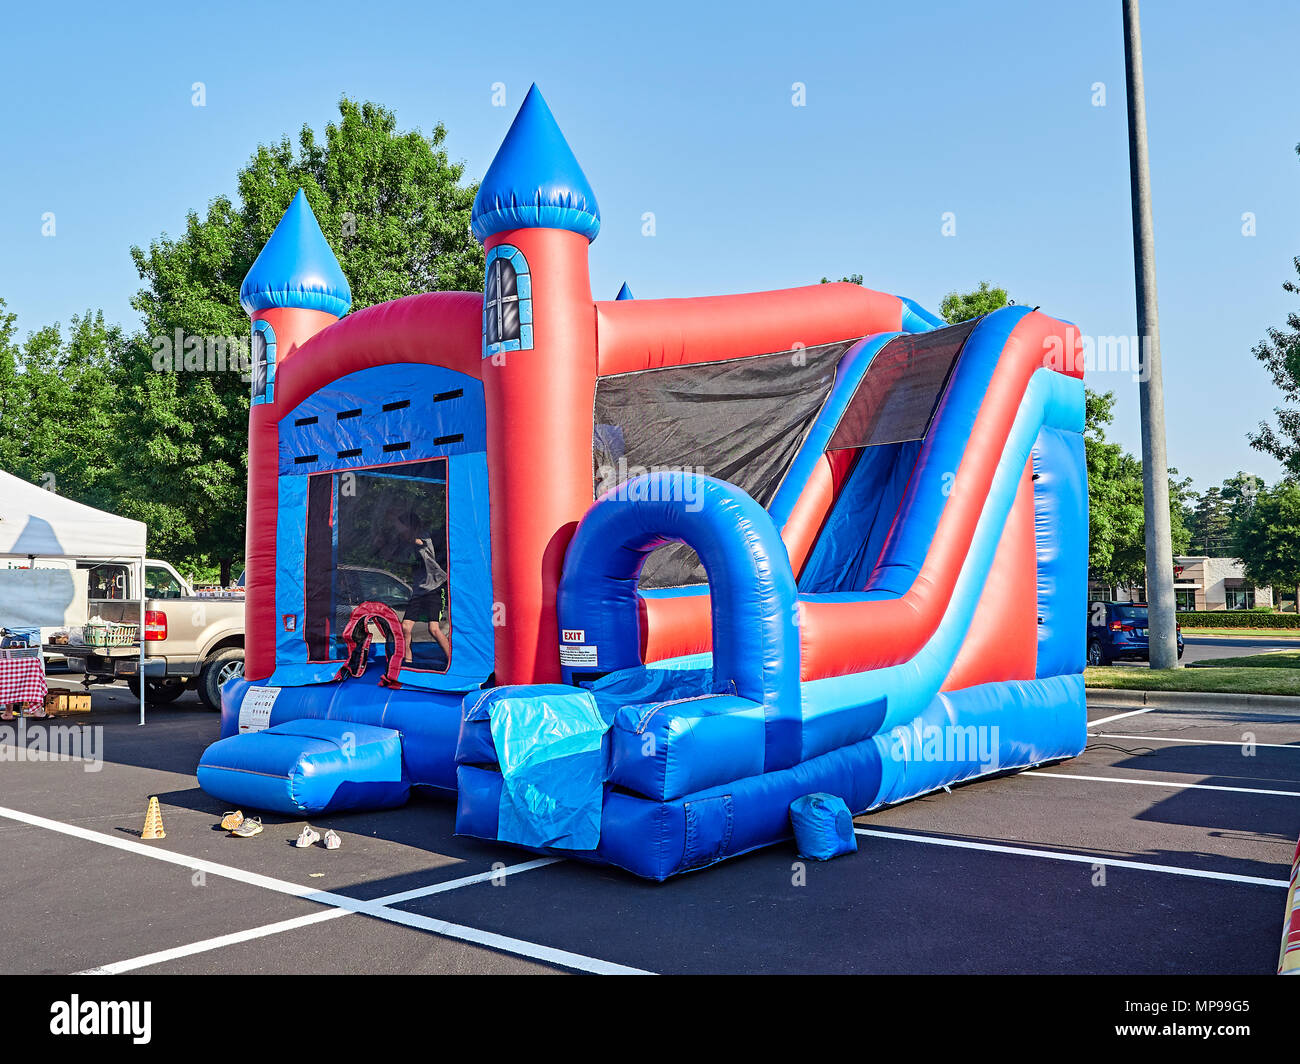 Inflatable bounce or bouncy house in shape of a castle designed for children at a local outdoor market in Montgomery Alabama, USA. Stock Photo